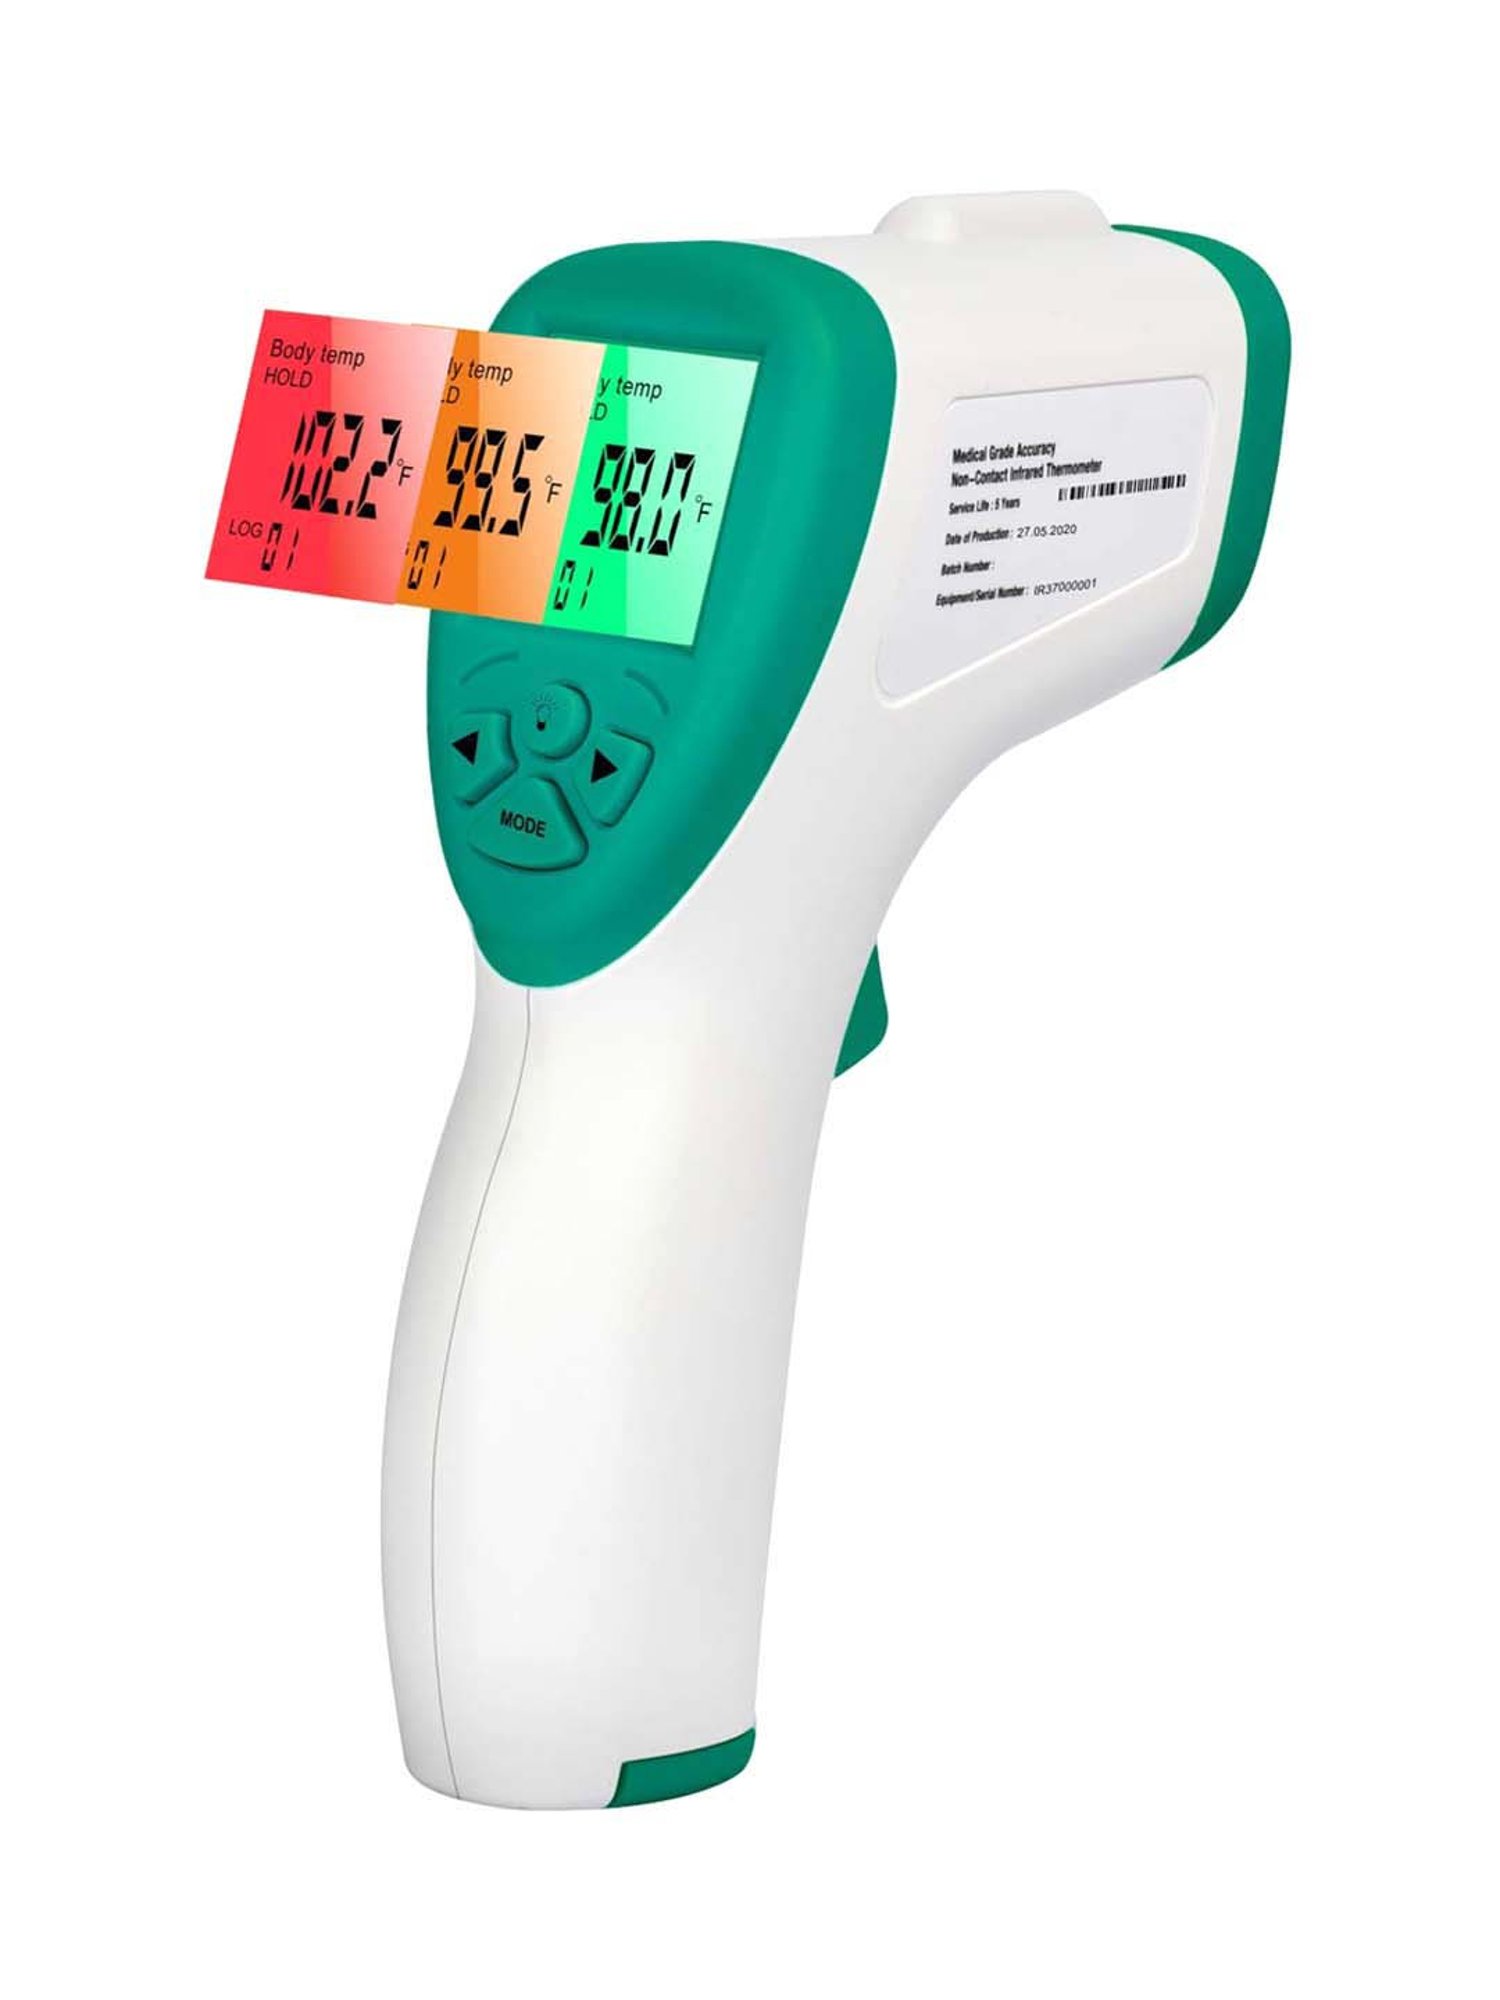 DR VAKU Infrared Thermometer Non-Contact Digital Laser Infrared